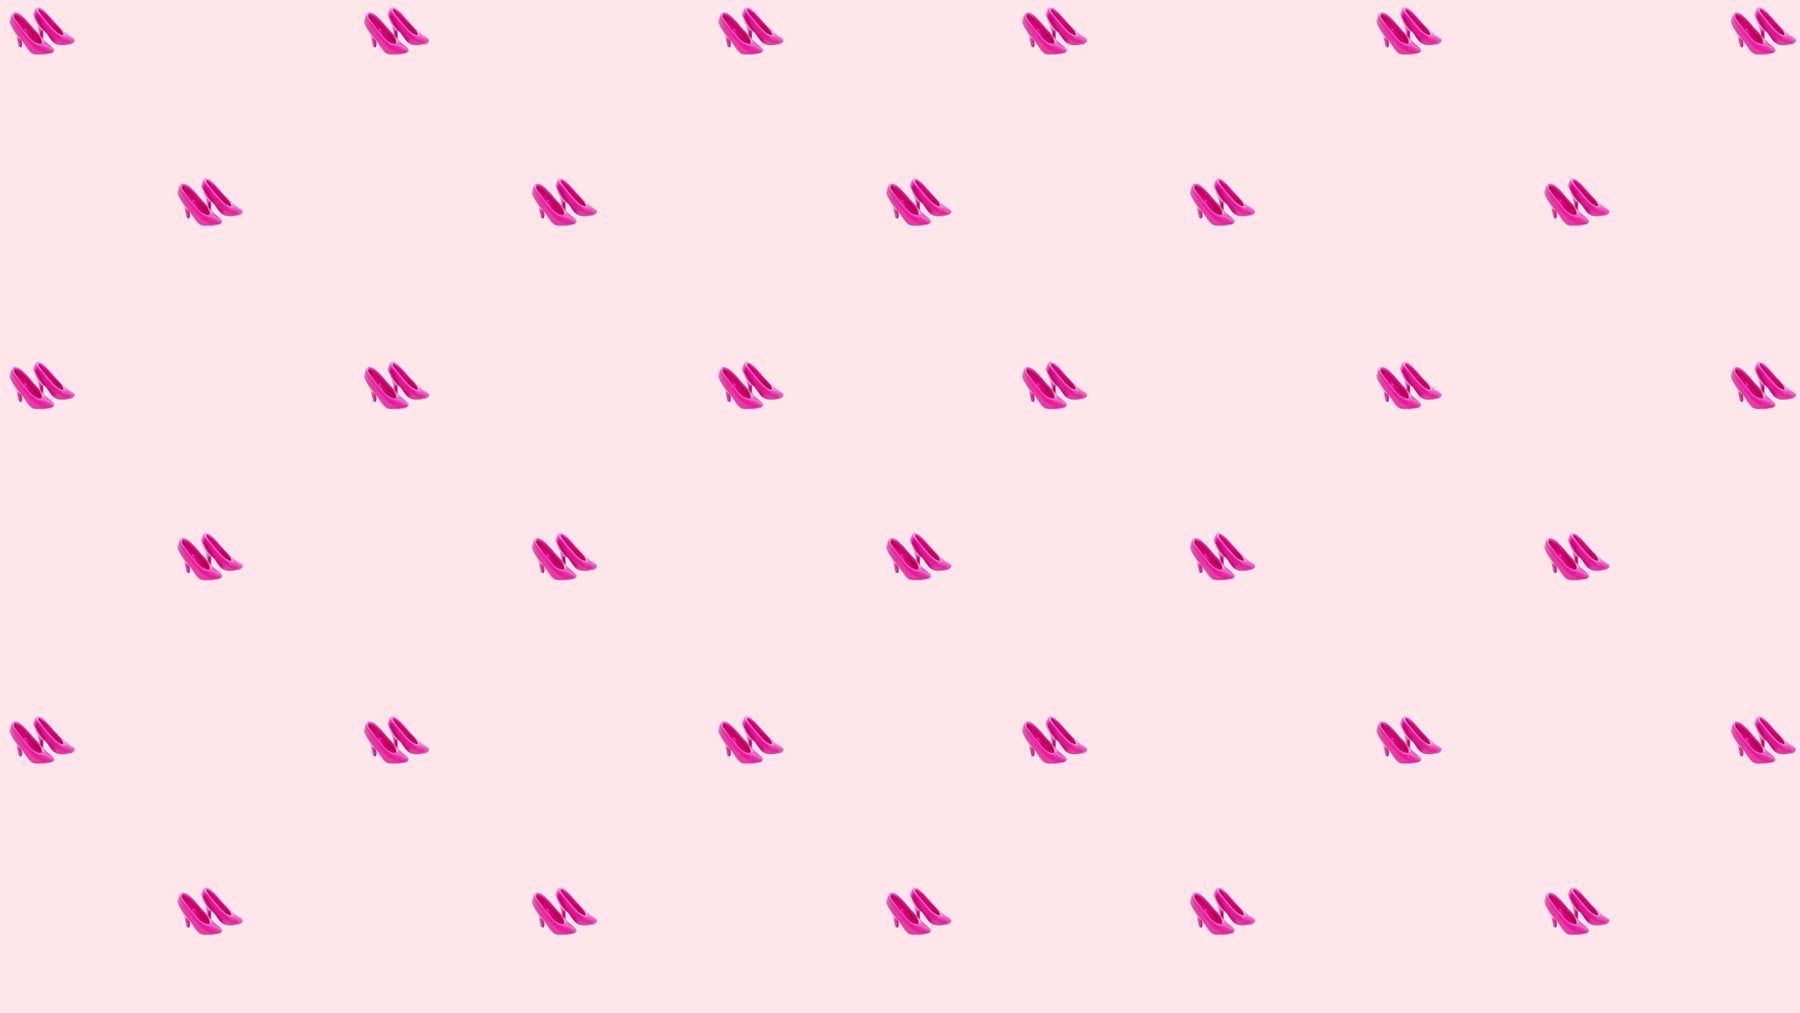 A pink background with a pattern of small pink high heels - Barbie